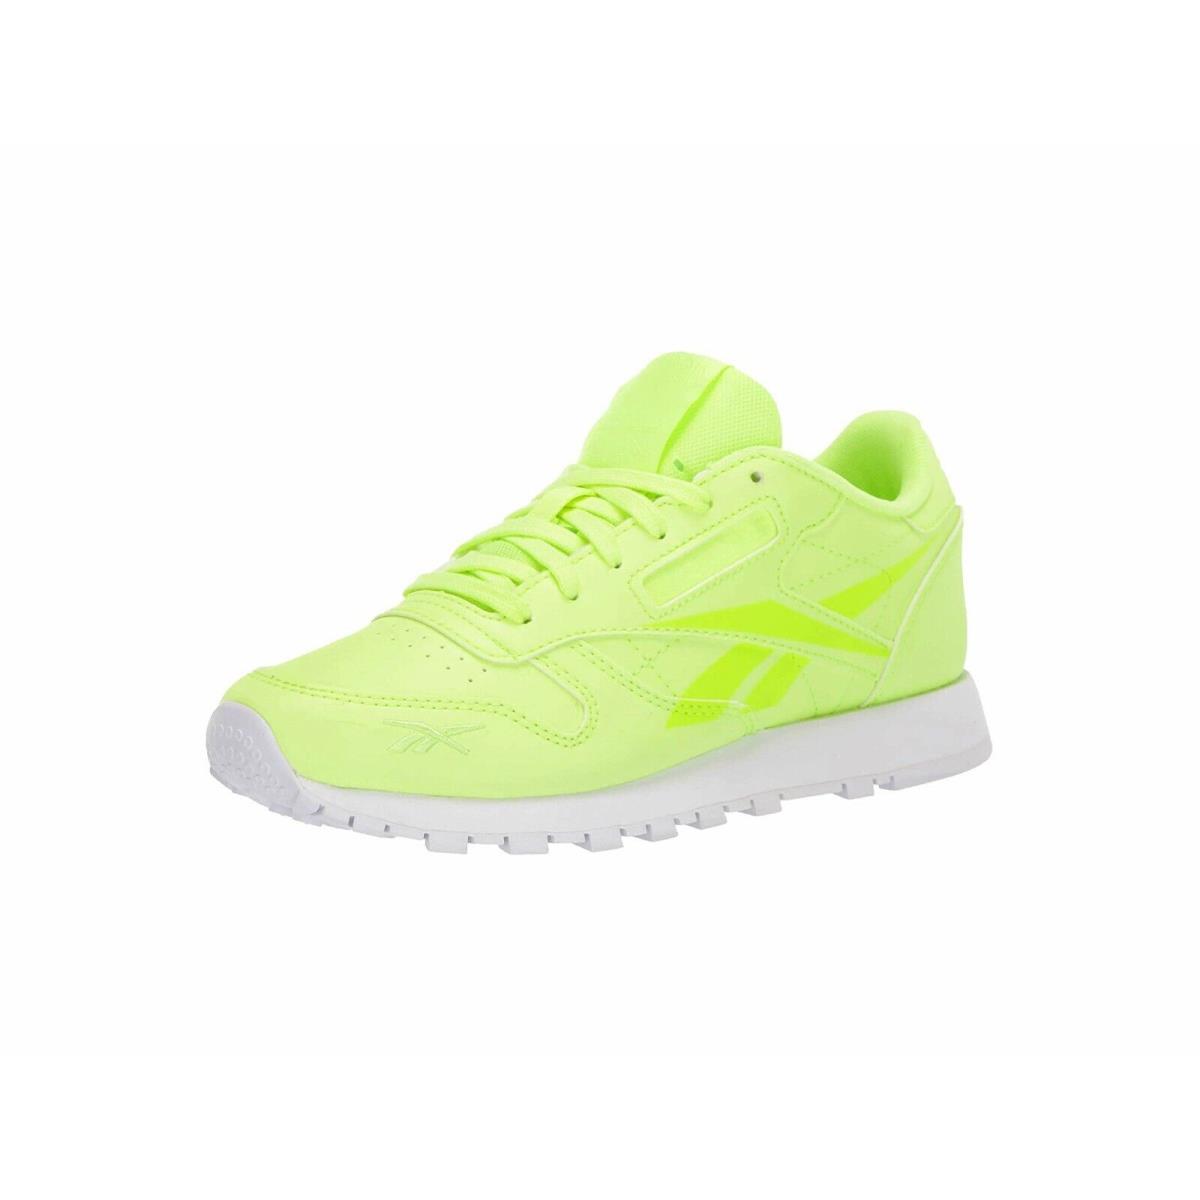 Reebok Classic Leather Elefla Neon Green Leather Men Shoes Sneakers - Green, Manufacturer: